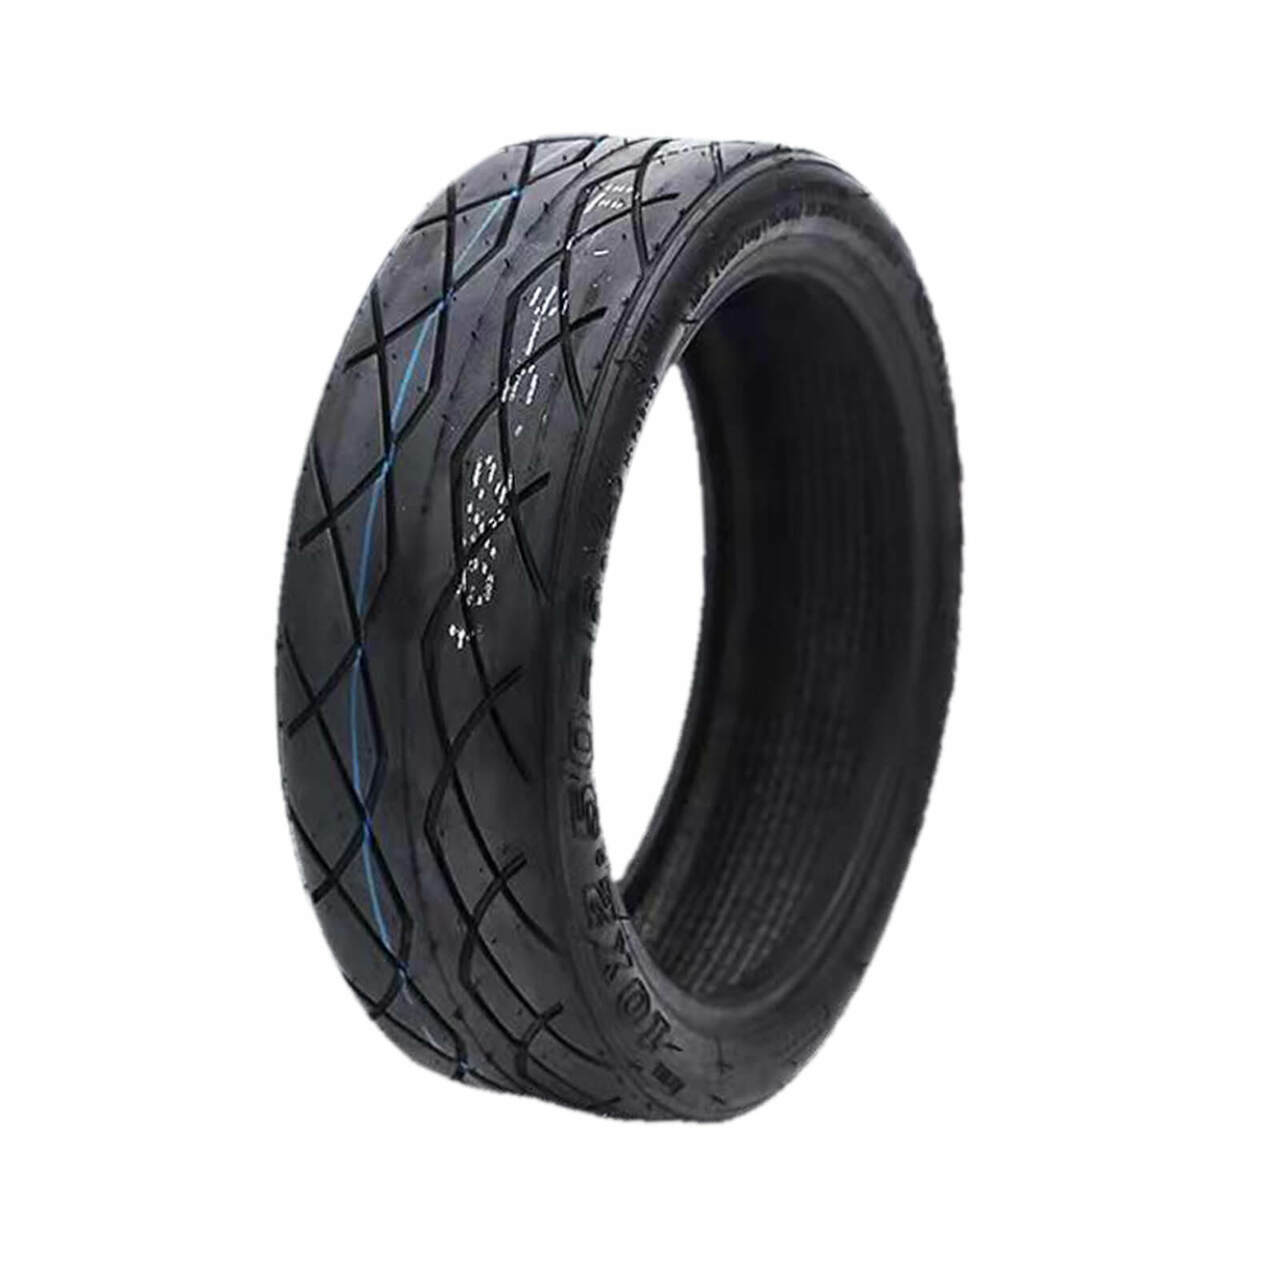 10" x 3" InMotion S1 Tubeless Tyre